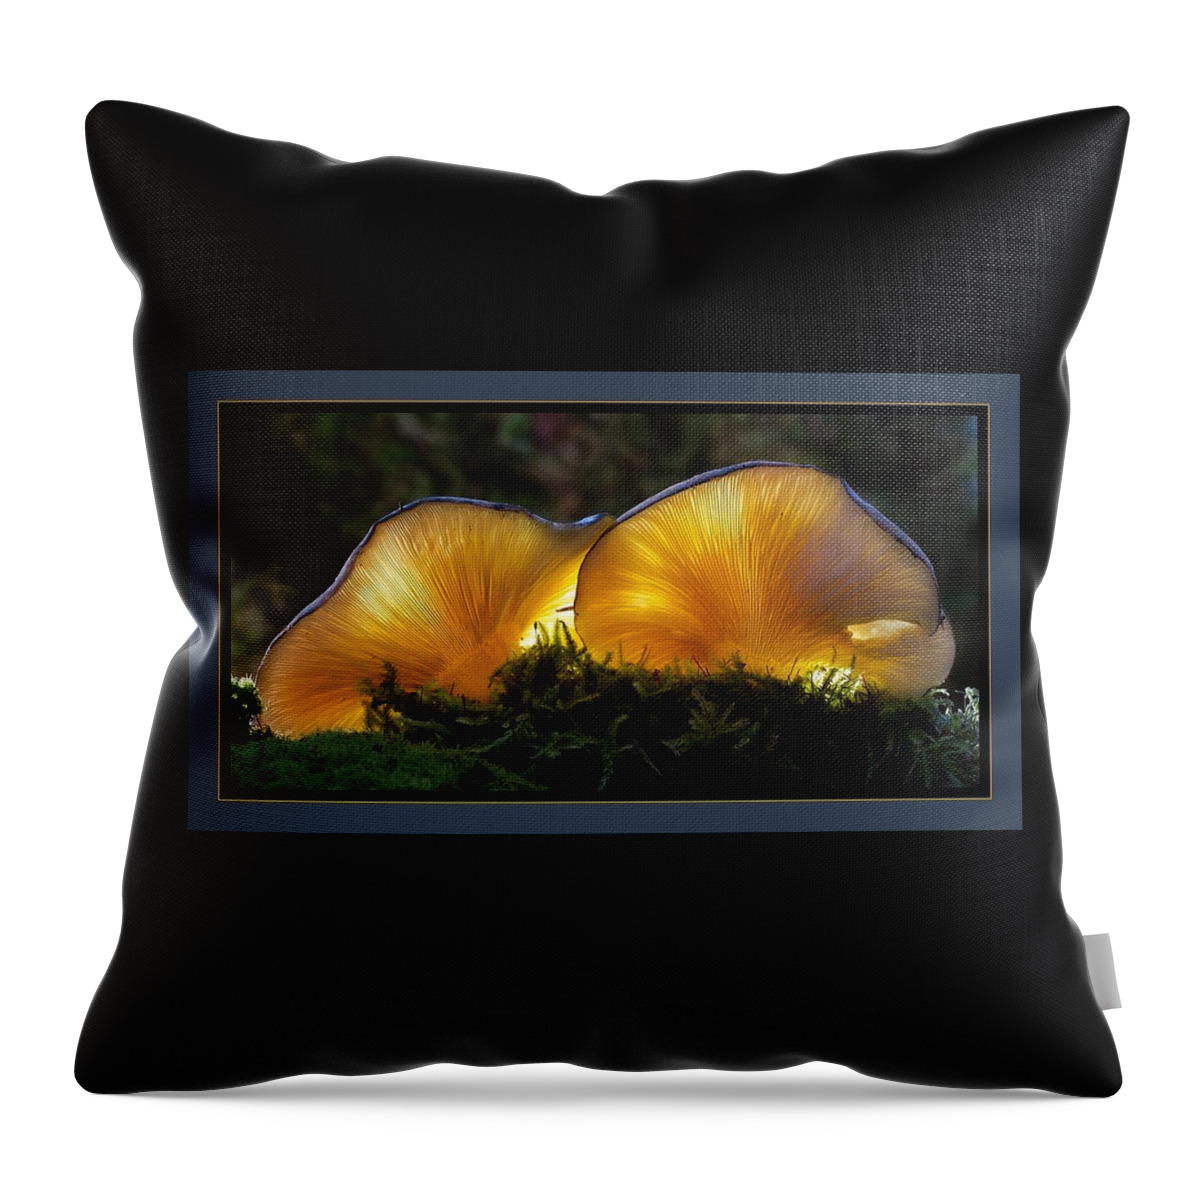 Mushrooms Throw Pillow featuring the photograph Magnificent Mushrooms by Nancy Ayanna Wyatt